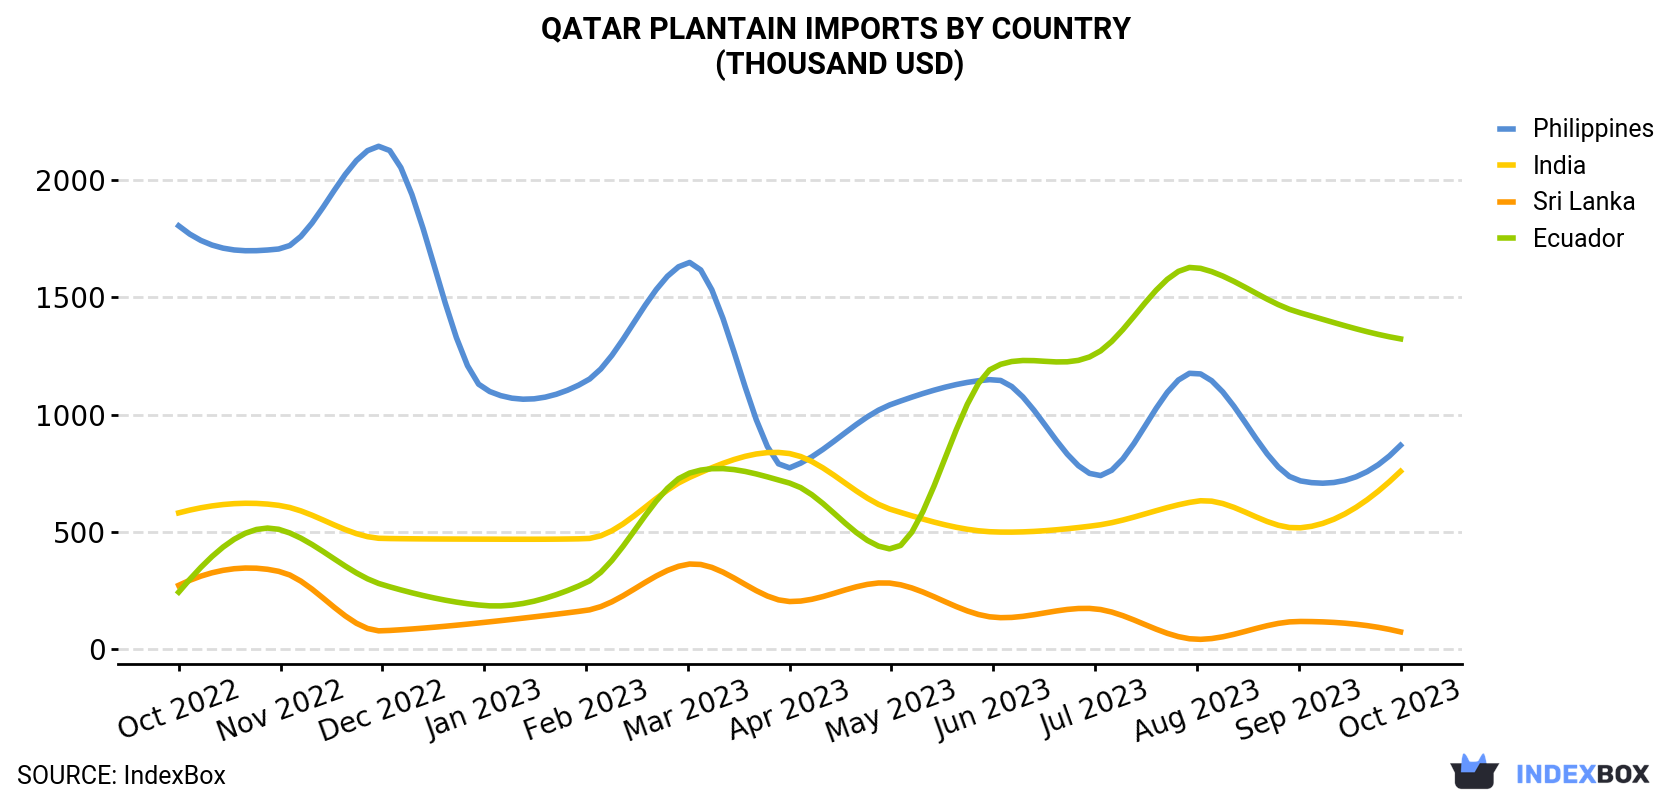 Qatar Plantain Imports By Country (Thousand USD)